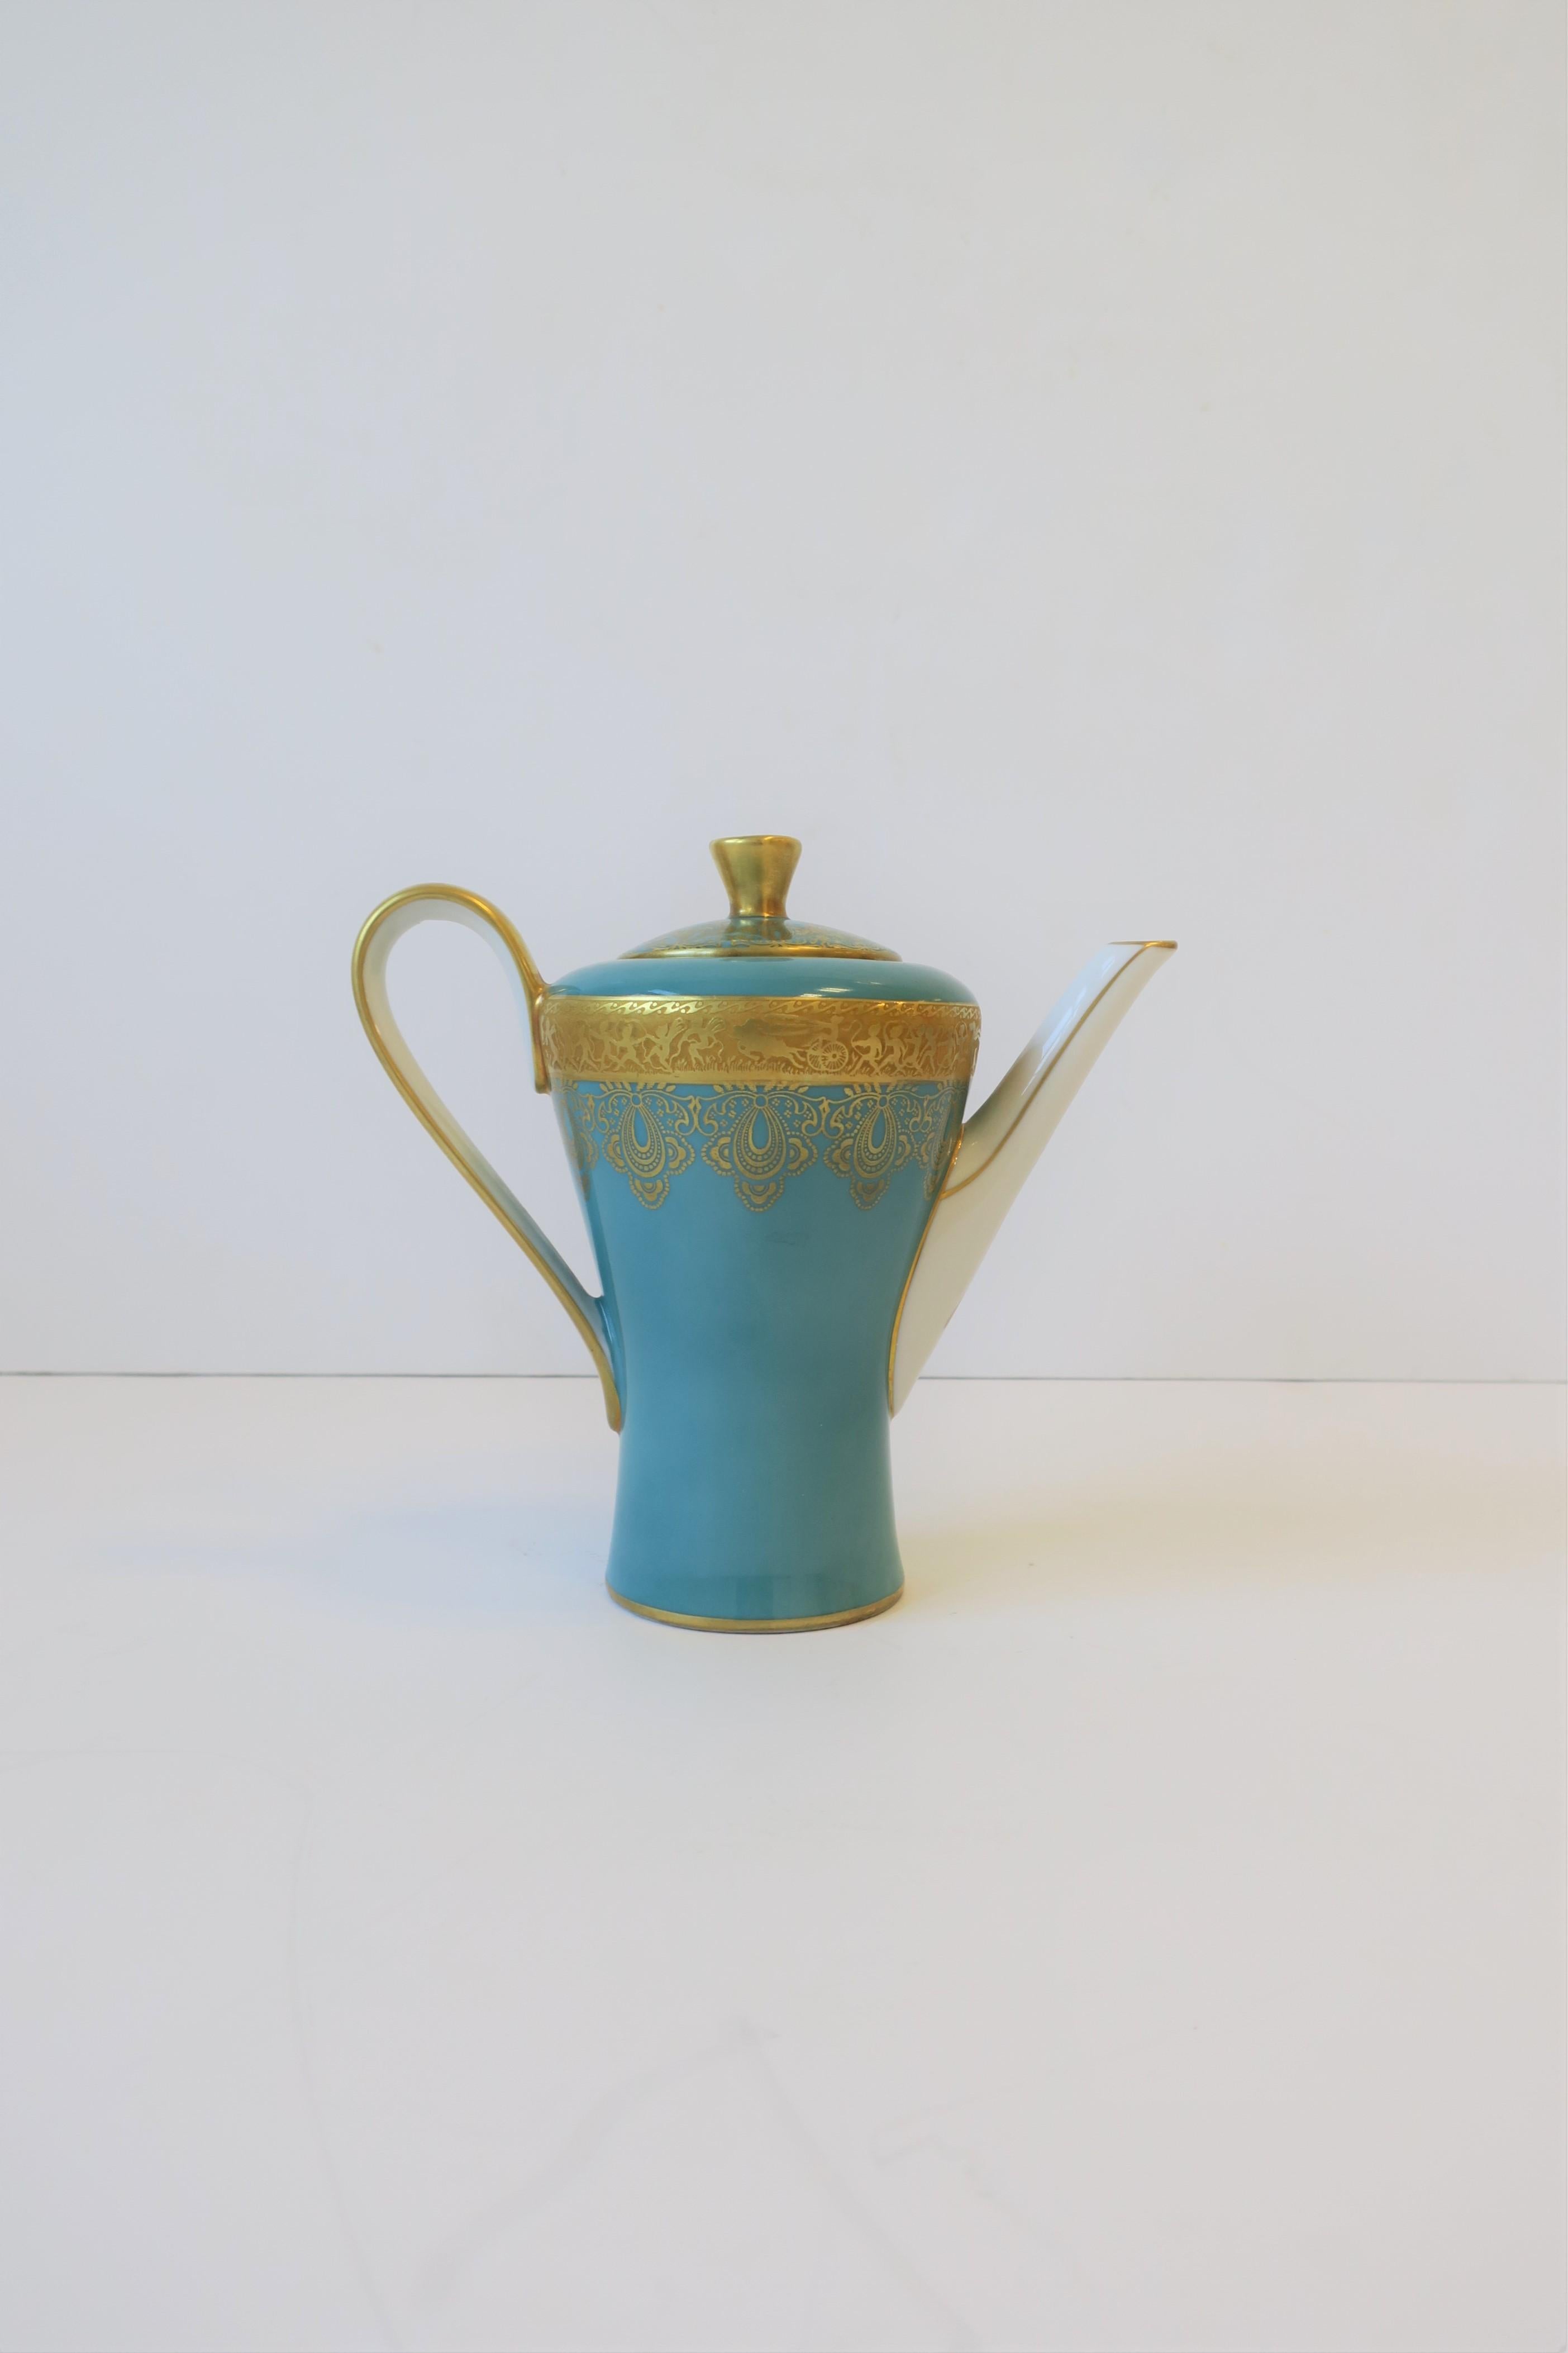 A beautiful German turquoise blue, gold and white porcelain tea or coffee pot, circa early to mid-20th century, Germany. Piece has a beautiful detailed raised 24-karat gold relief of horse and carriage, animals and fairies, around top exterior band.